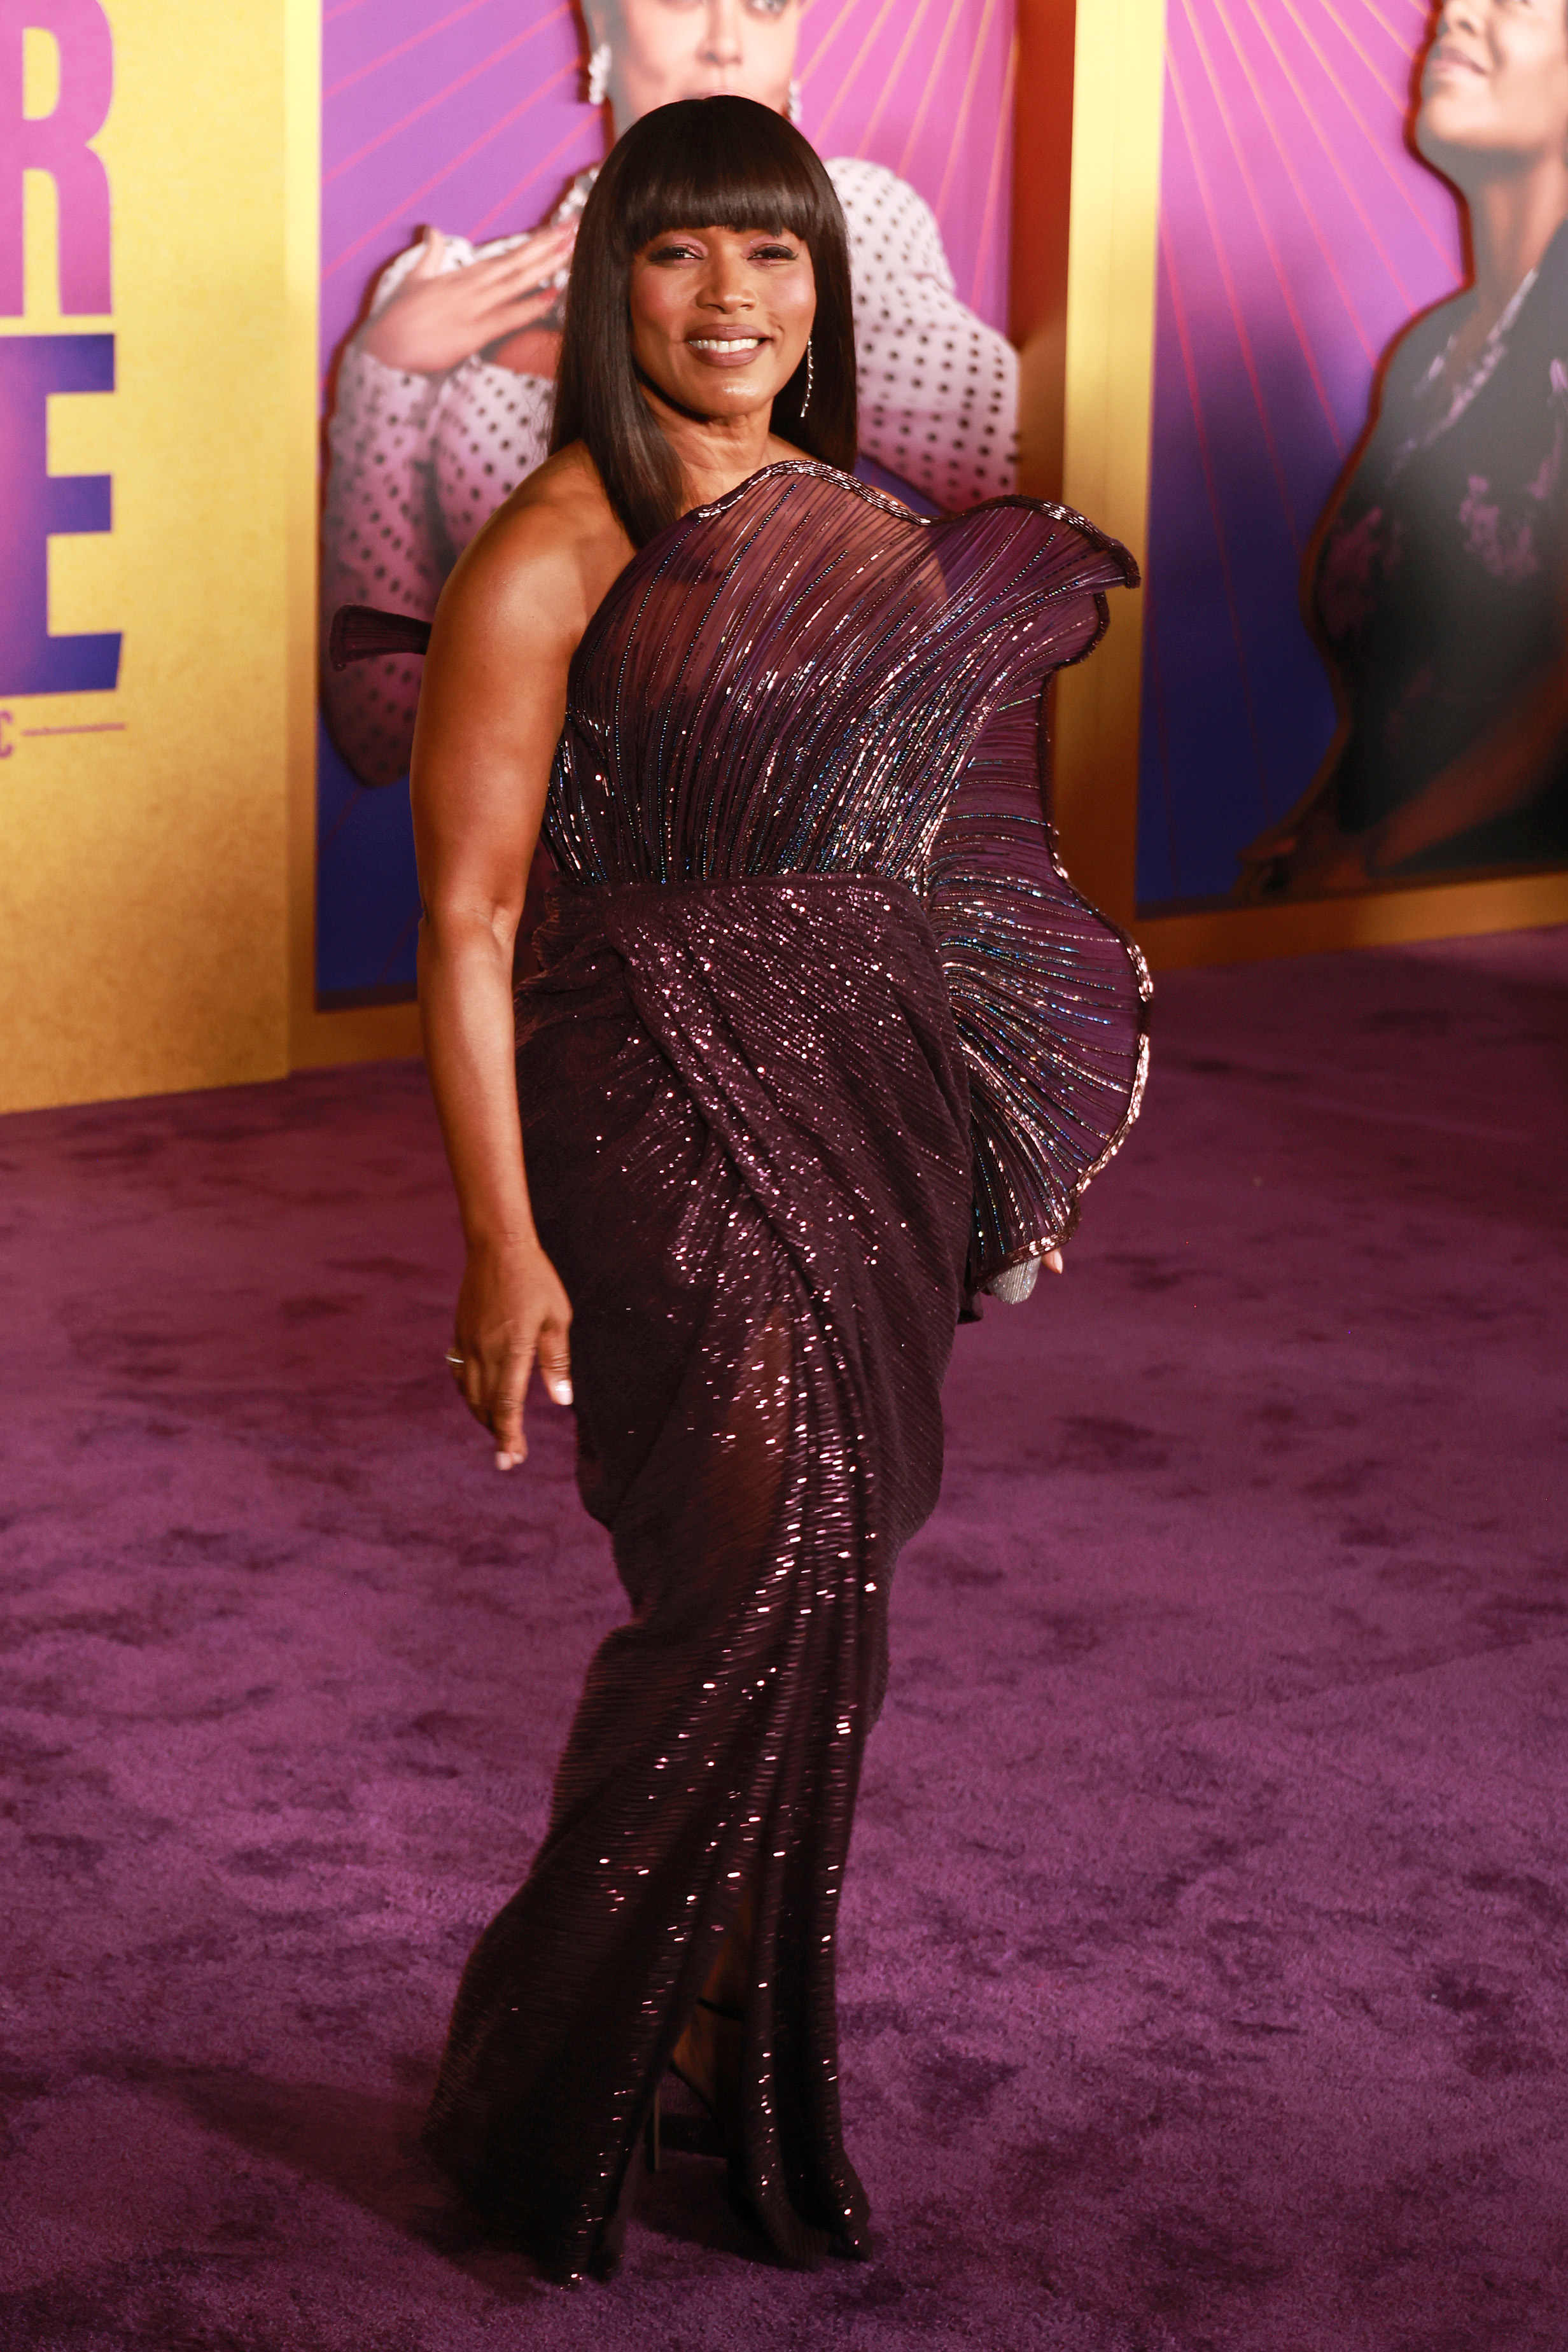 Angela in a sparkly sleeveless, one-shoulder purplish gown